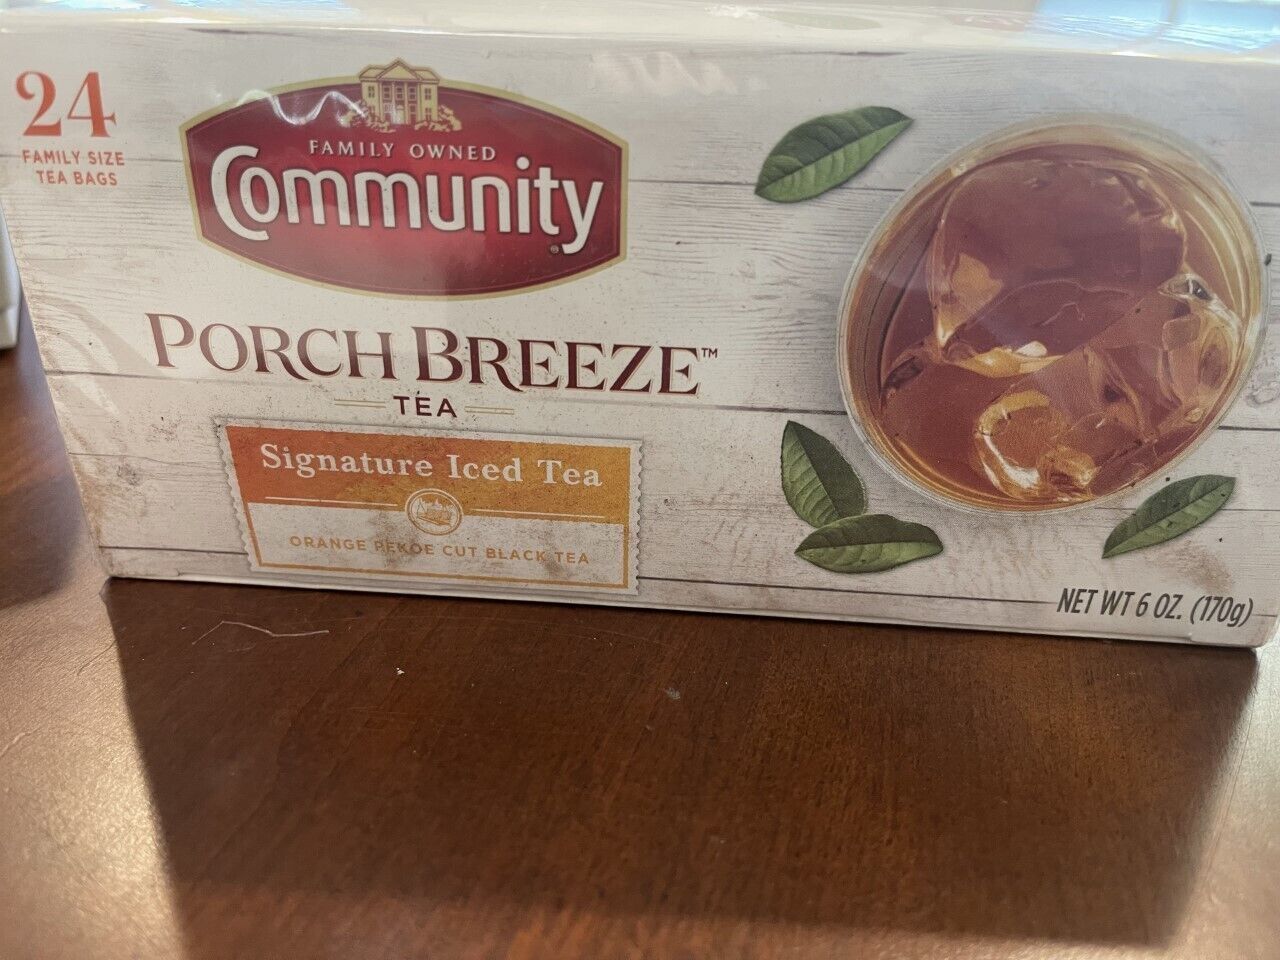 Community Coffee Porch Breeze Signature Iced Tea Bags, Family Size, Box Of 24